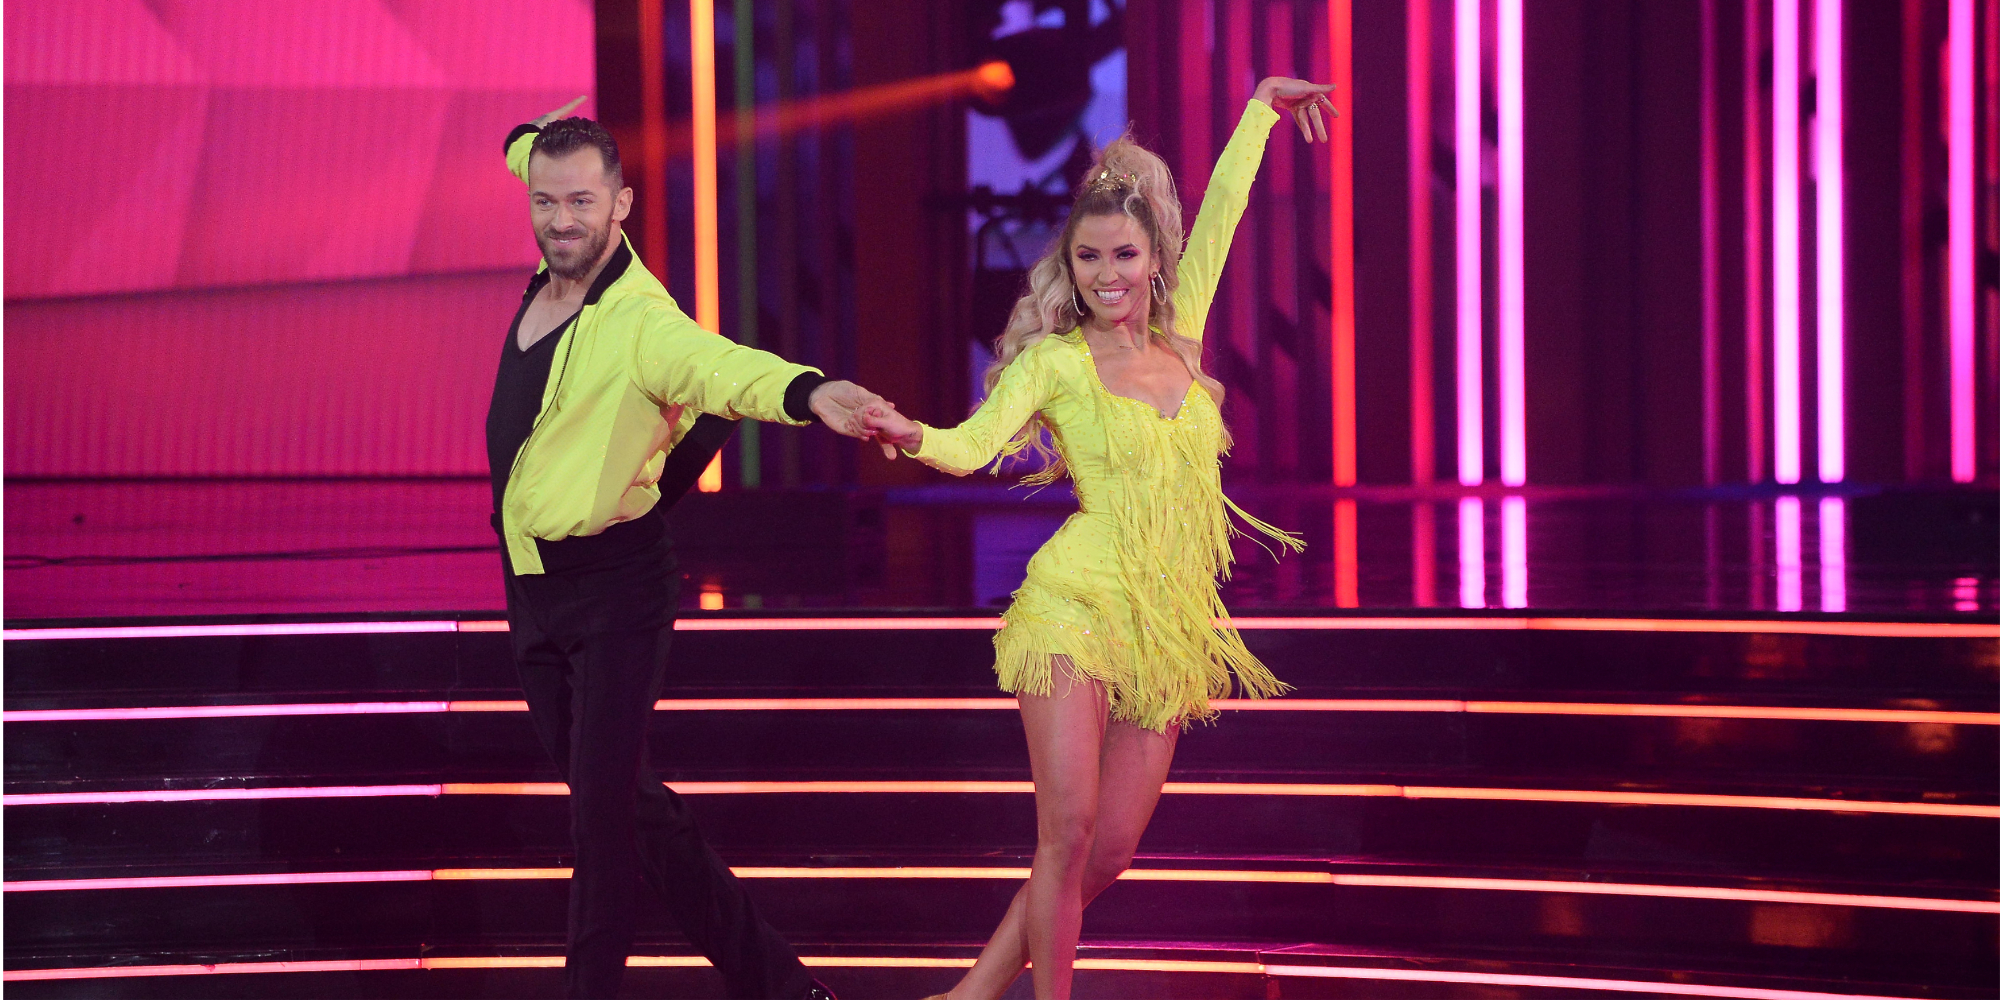 Artem Chigvinstev and Kaitlyn Bristowe on 'Dancing with the Stars' when 'The Bachelorette' contestant won a mirrorball trophy.